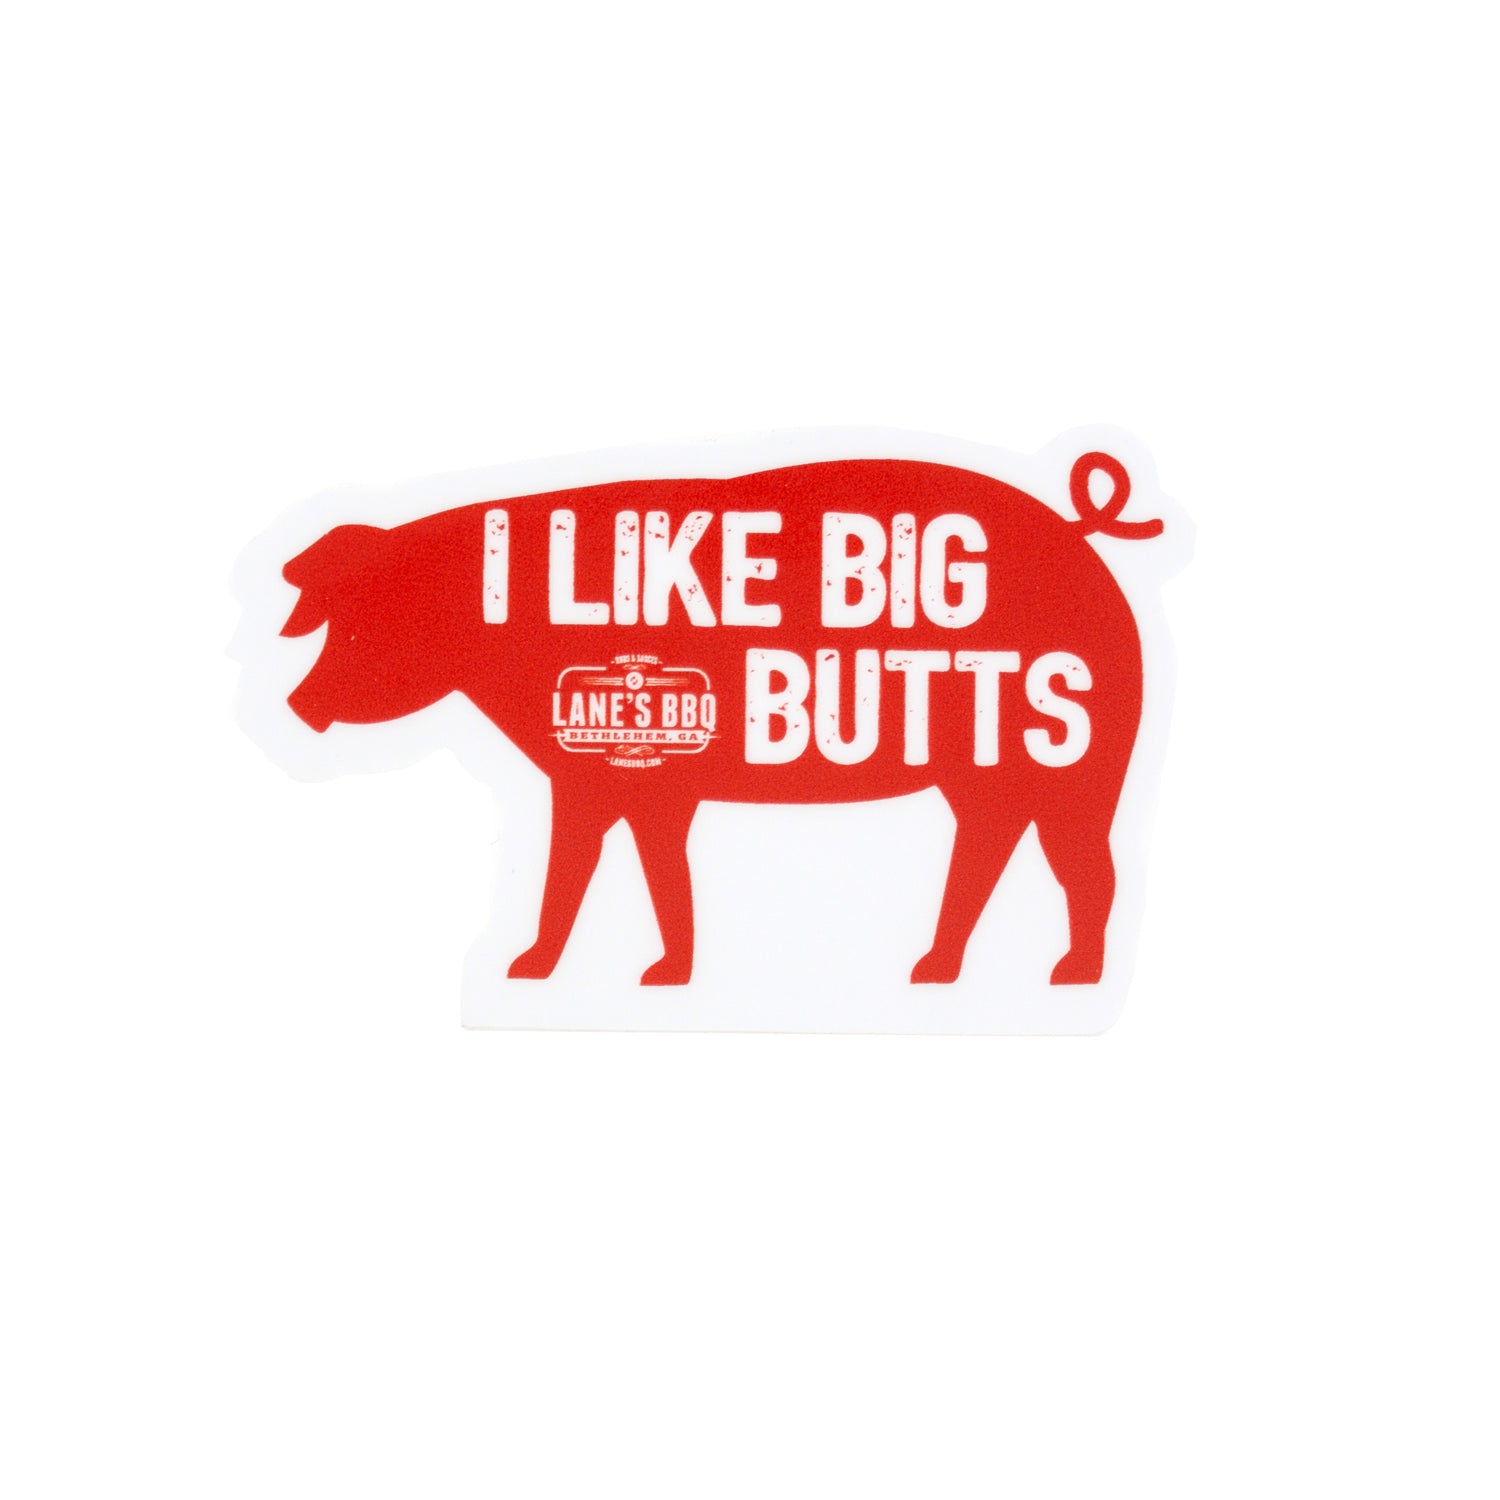 cassie sheek recommends i like big butts pics pic